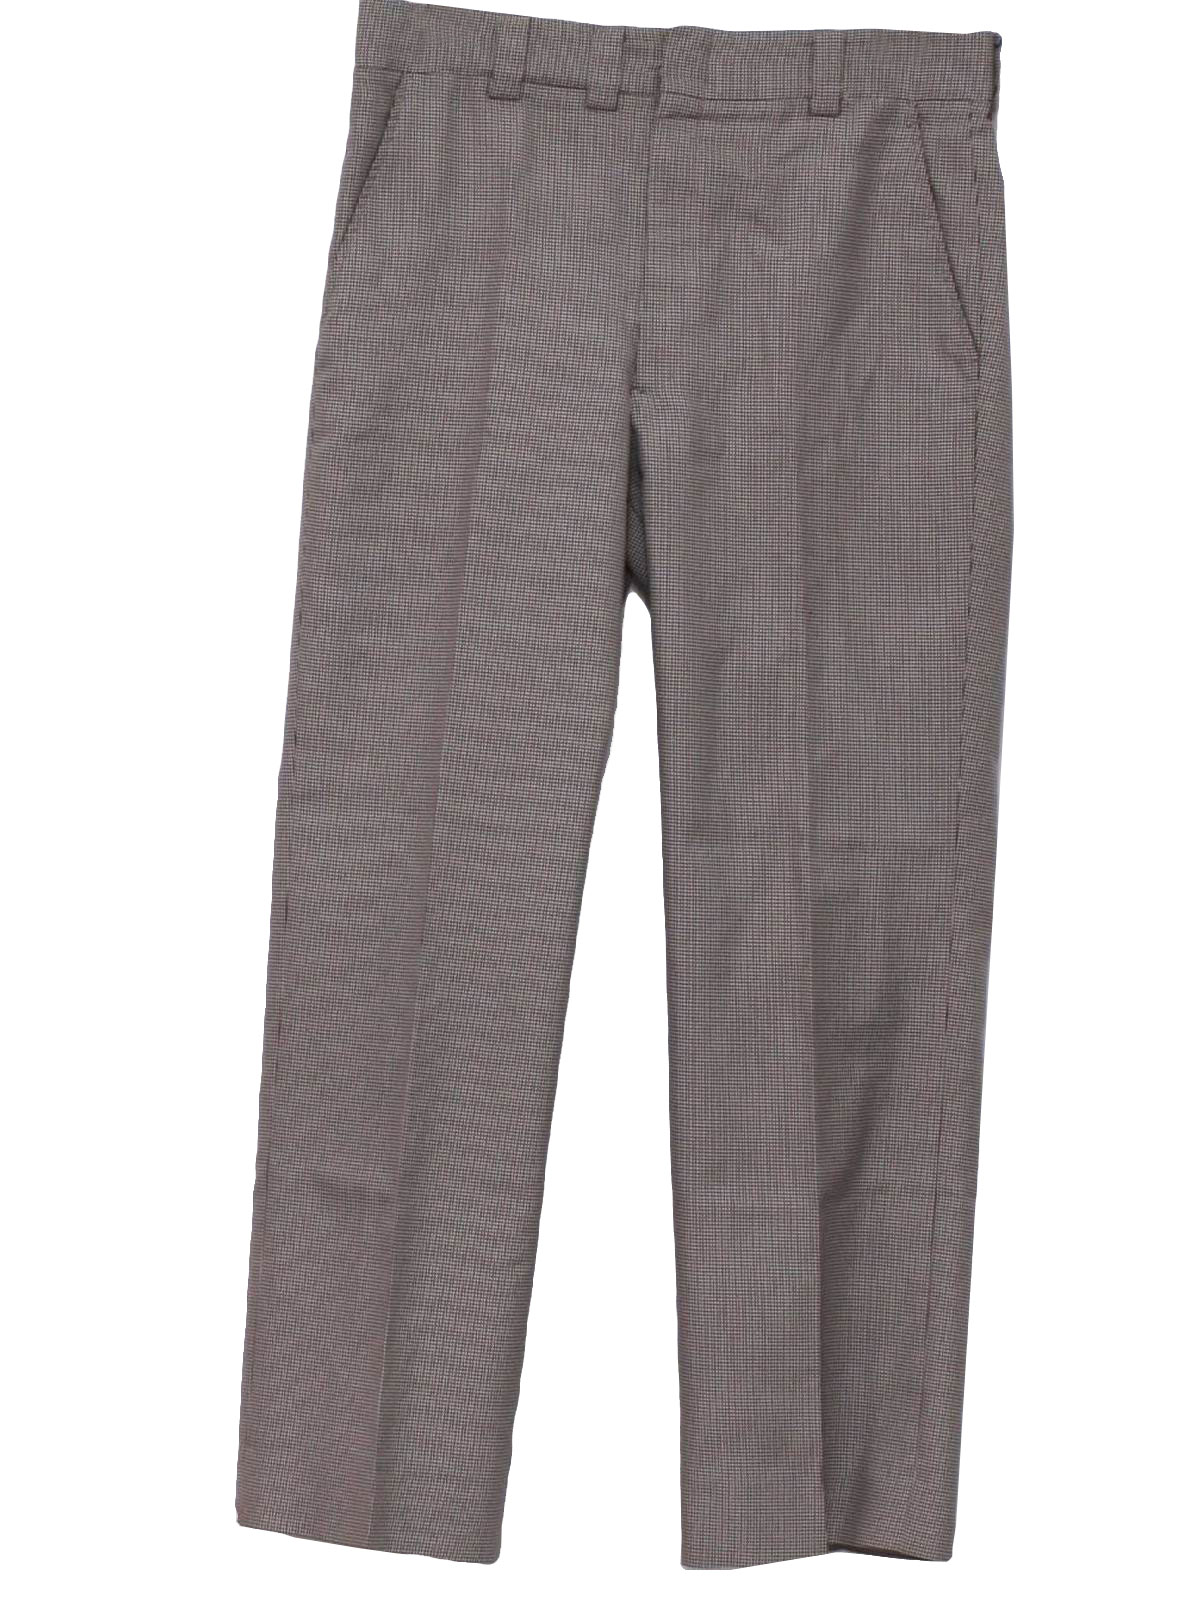 70's Pants: 70s -No Label- Mens dark and light brown and red subtle ...